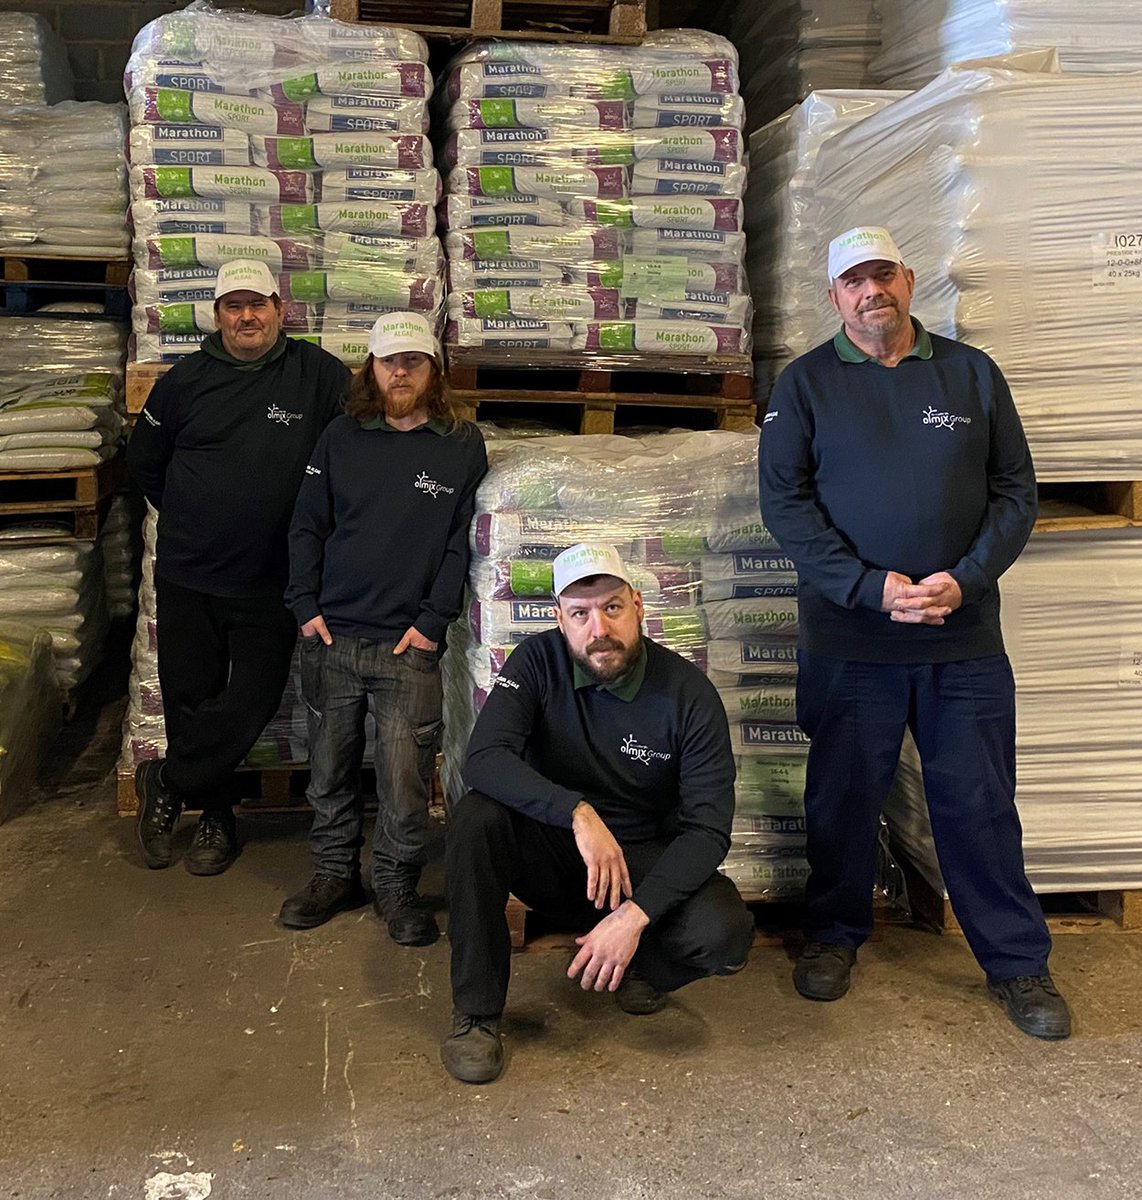 It's the end of a Marathon week for the warehouse team. We want to thank the warehouse team for their outstanding efforts to keep deliveries to customers on time.

@olmixgroup 

#dreamteam #greatcustomerservice #fastdelivery #olmix #marathonalgaesport